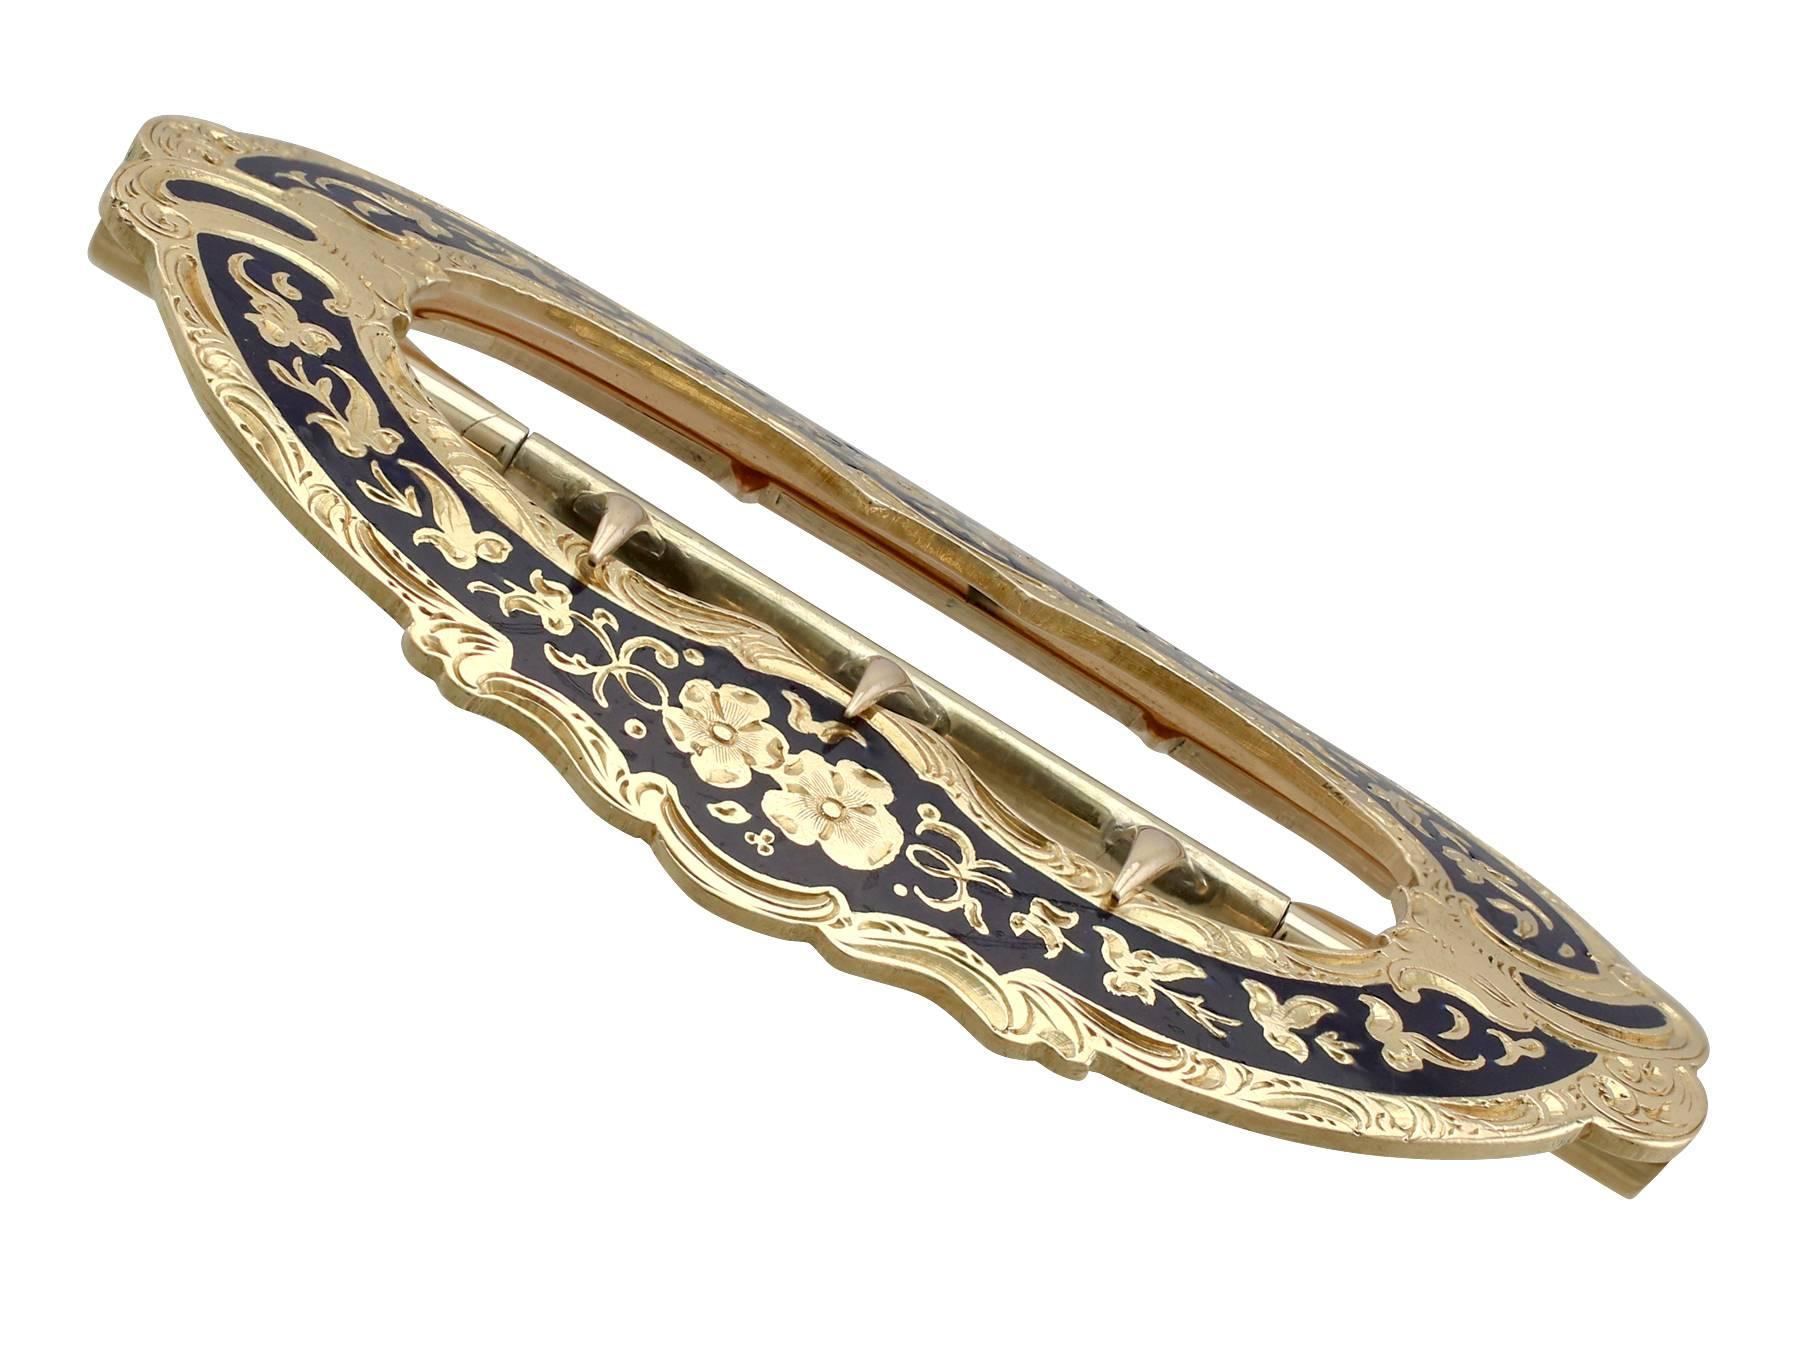 An impressive antique Victorian blue enamel and 15 karat yellow gold belt buckle; part of our diverse antique jewelry and estate jewelry collections.

This fine and impressive antique belt buckle has been crafted in 15k yellow gold.

The oval shaped